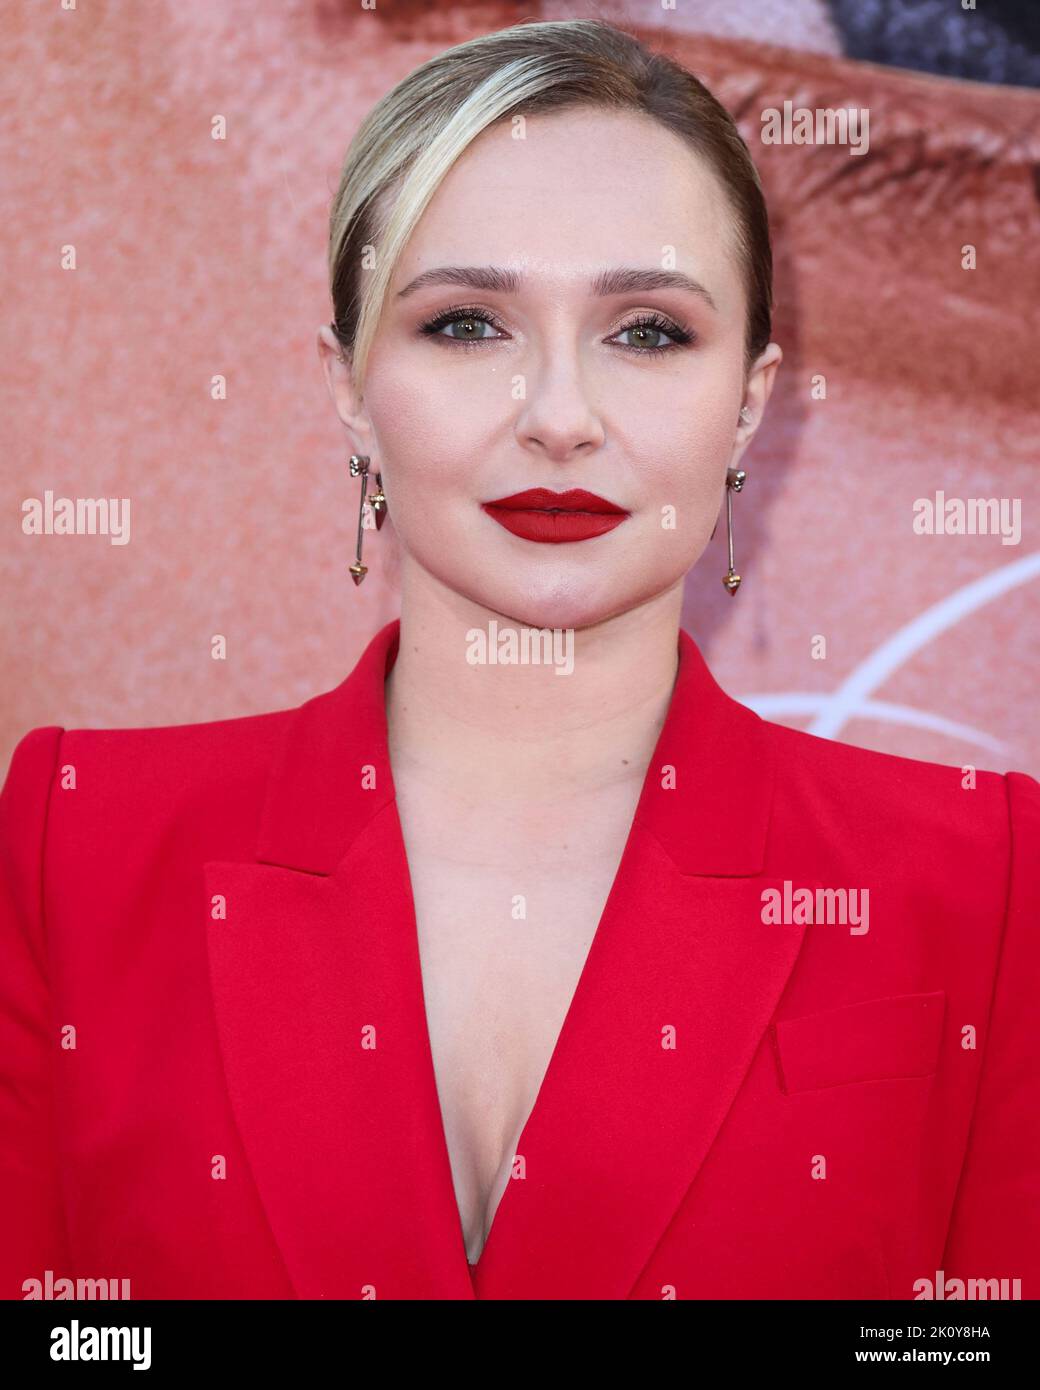 HOLLYWOOD, LOS ANGELES, CALIFORNIA, USA - SEPTEMBER 13: American actress Hayden Panettiere arrives at the Los Angeles Premiere Of Netflix's 'Blonde' held at the TCL Chinese Theatre IMAX on September 13, 2022 in Hollywood, Los Angeles, California, United States. (Photo by Xavier Collin/Image Press Agency) Stock Photo